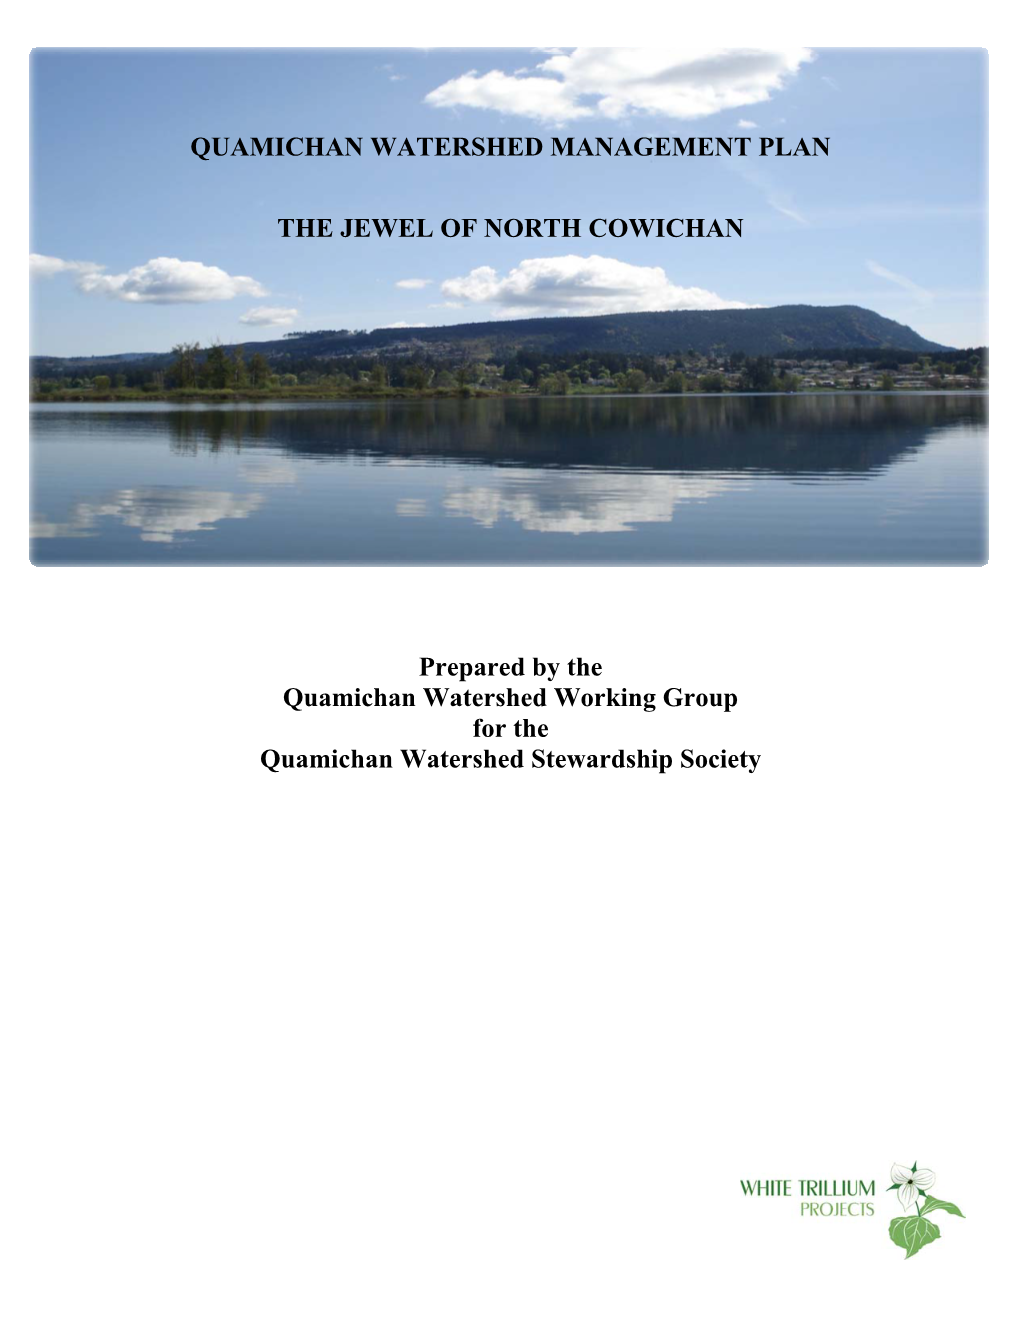 QUAMICHAN WATERSHED MANAGEMENT PLAN the JEWEL of NORTH COWICHAN Prepared by the Quamichan Watershed Working Group for the Quam